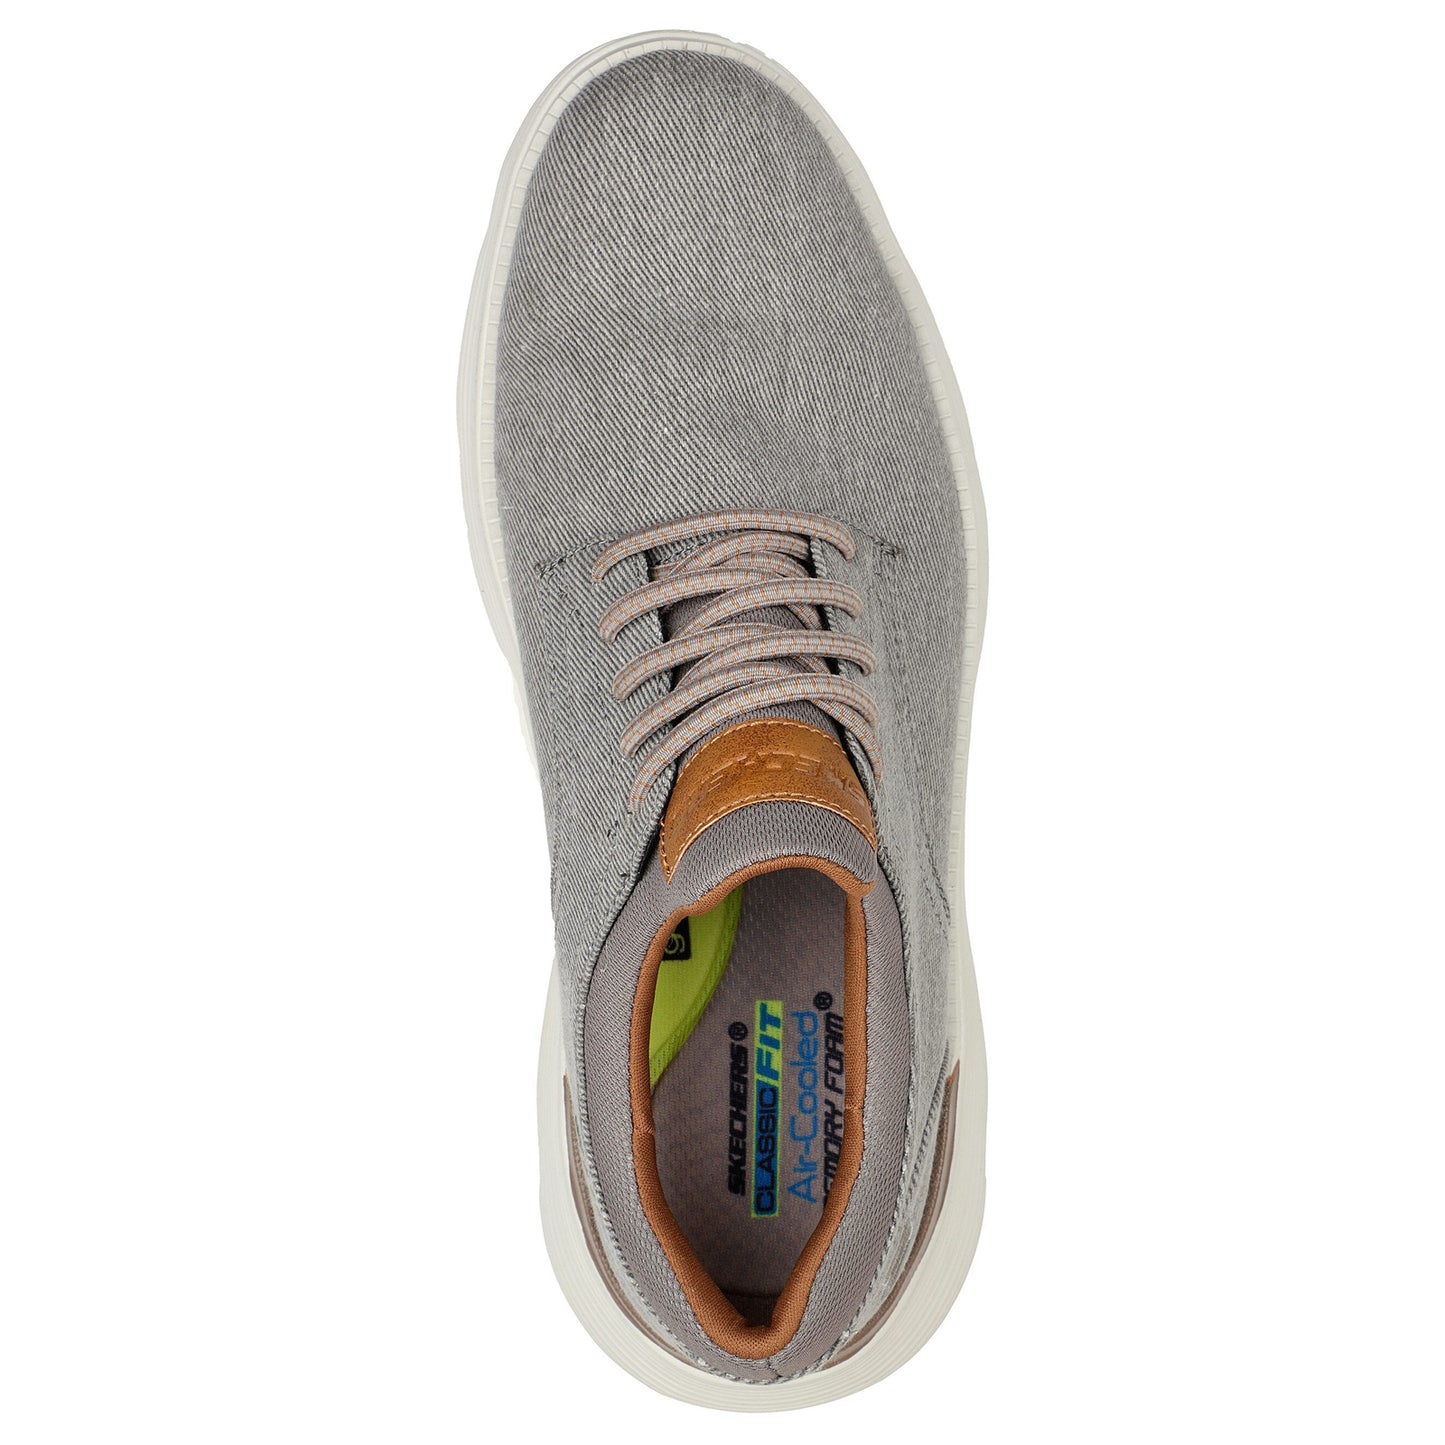 Skechers Mens Garza Romano Taupe Canvas Slip On Shoes